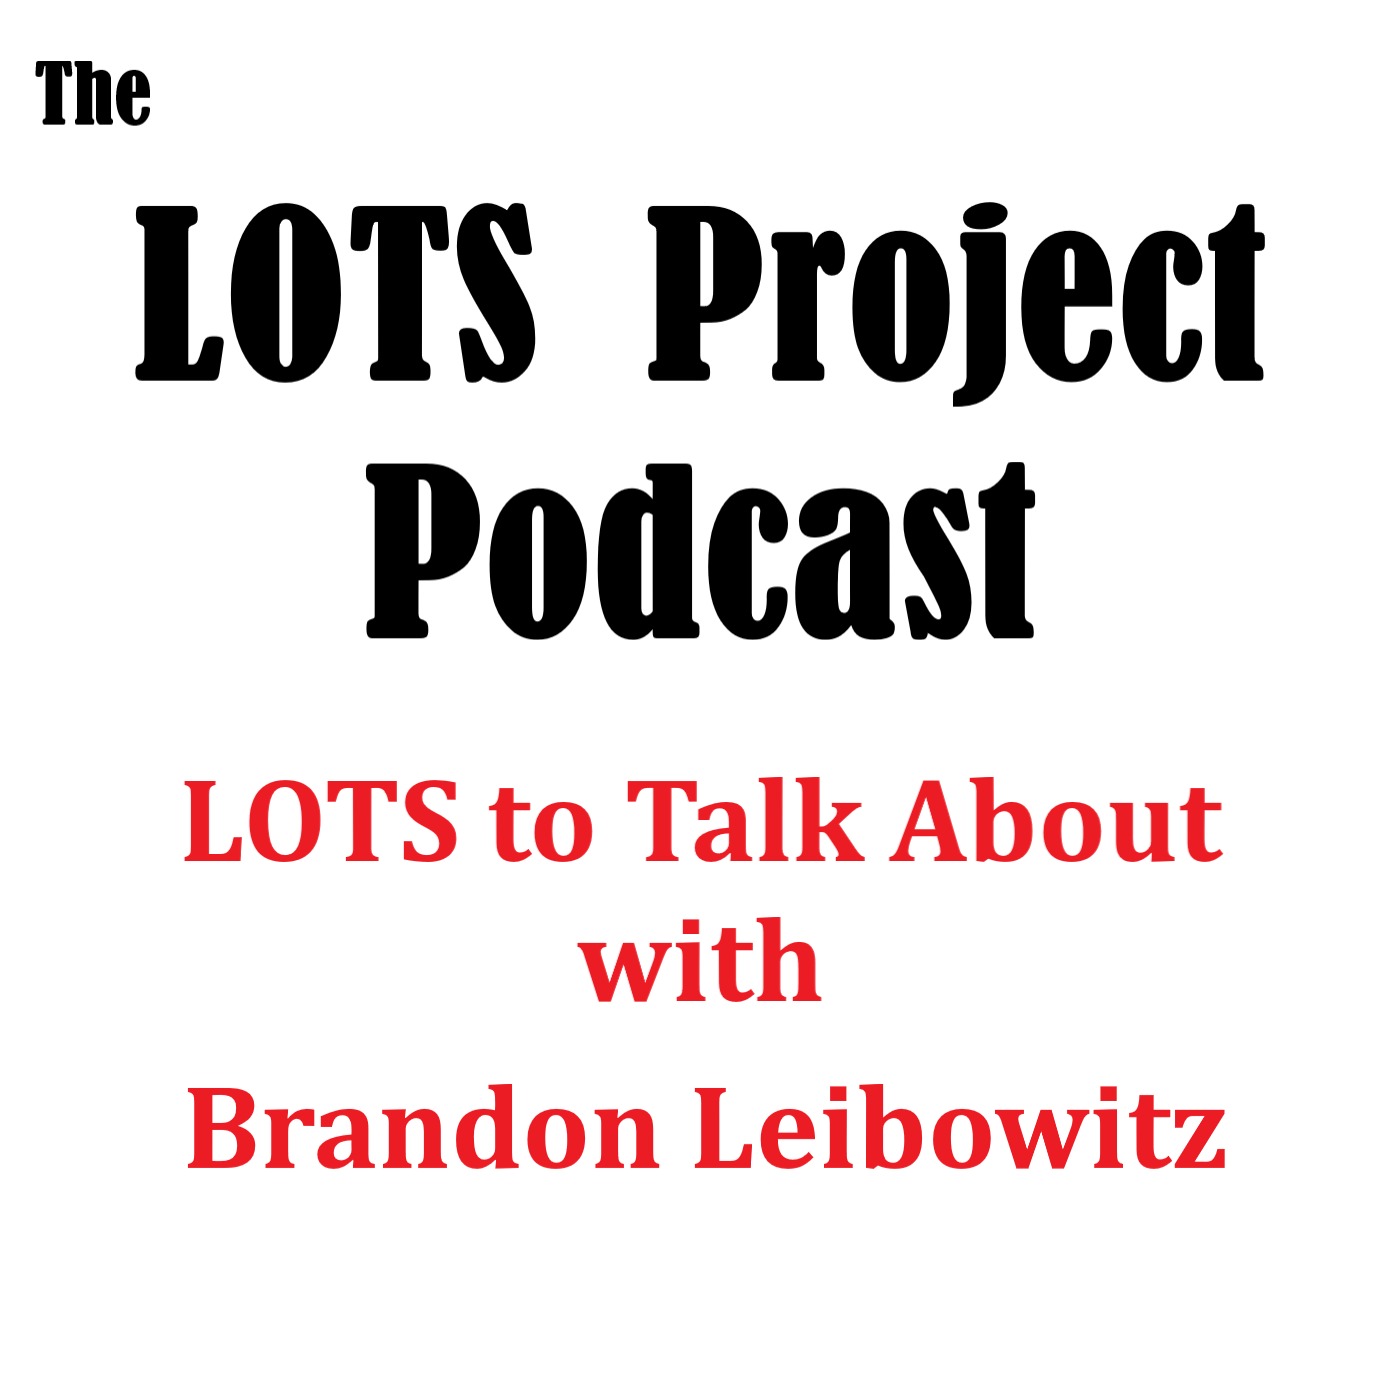 LOTS to Talk About with Brandon Leibowitz  #interview #podcast #live #seo #marketing #smallbusiness